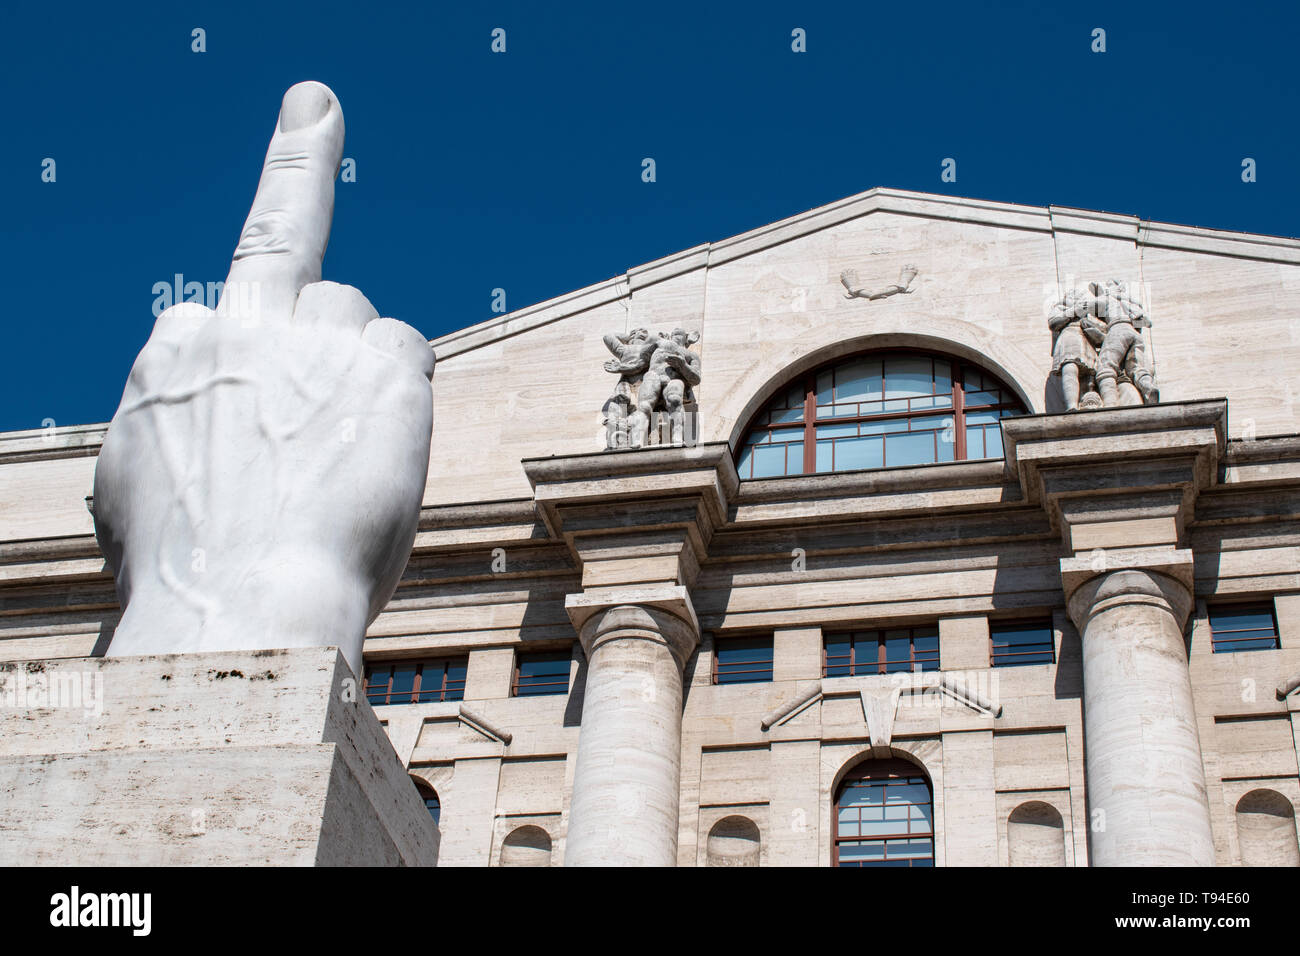 Milan, Italy: L.O.V.E. or The Finger, sculpture made by Maurizio Cattelan in front of Palazzo Mezzanotte, building housing is the Milan Stock Exchange Stock Photo